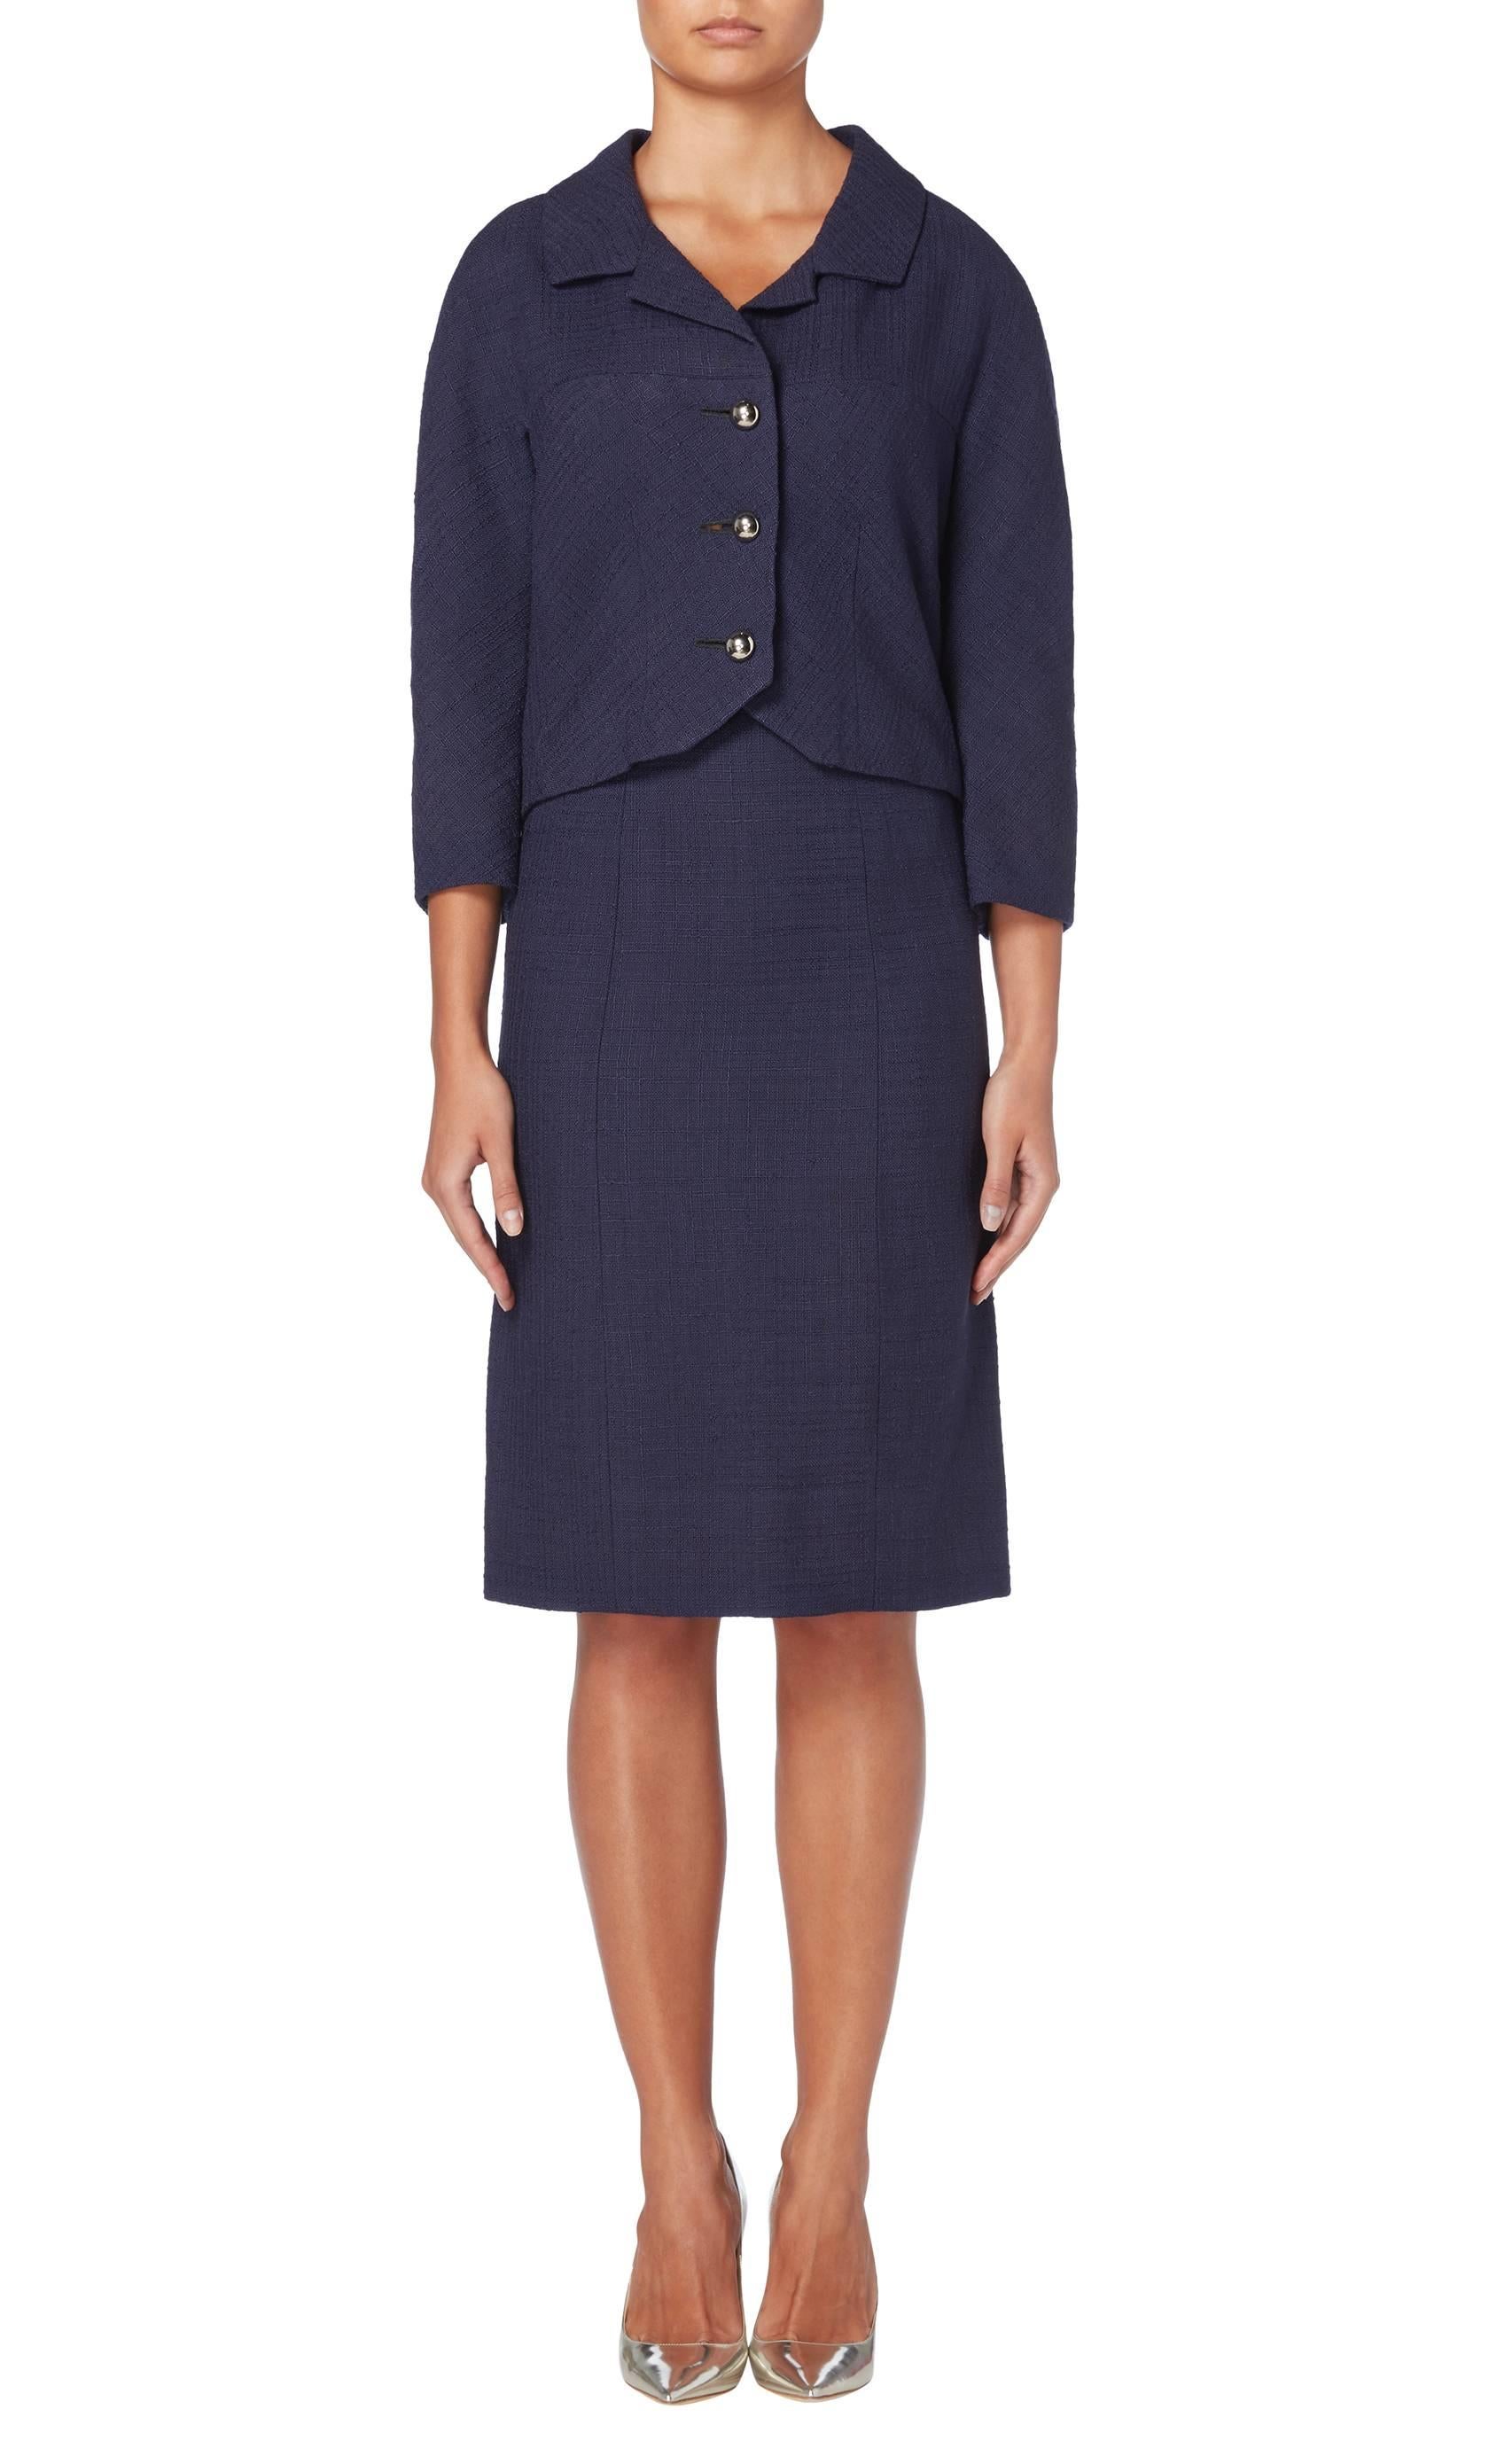 A great wardrobe staple, this Balenciaga haute couture skirt suit is a fantastic investment piece. Constructed in navy wool, the jacket features a double lapel collar and three-quarter length sleeves, while silver domed buttons fasten to the front.